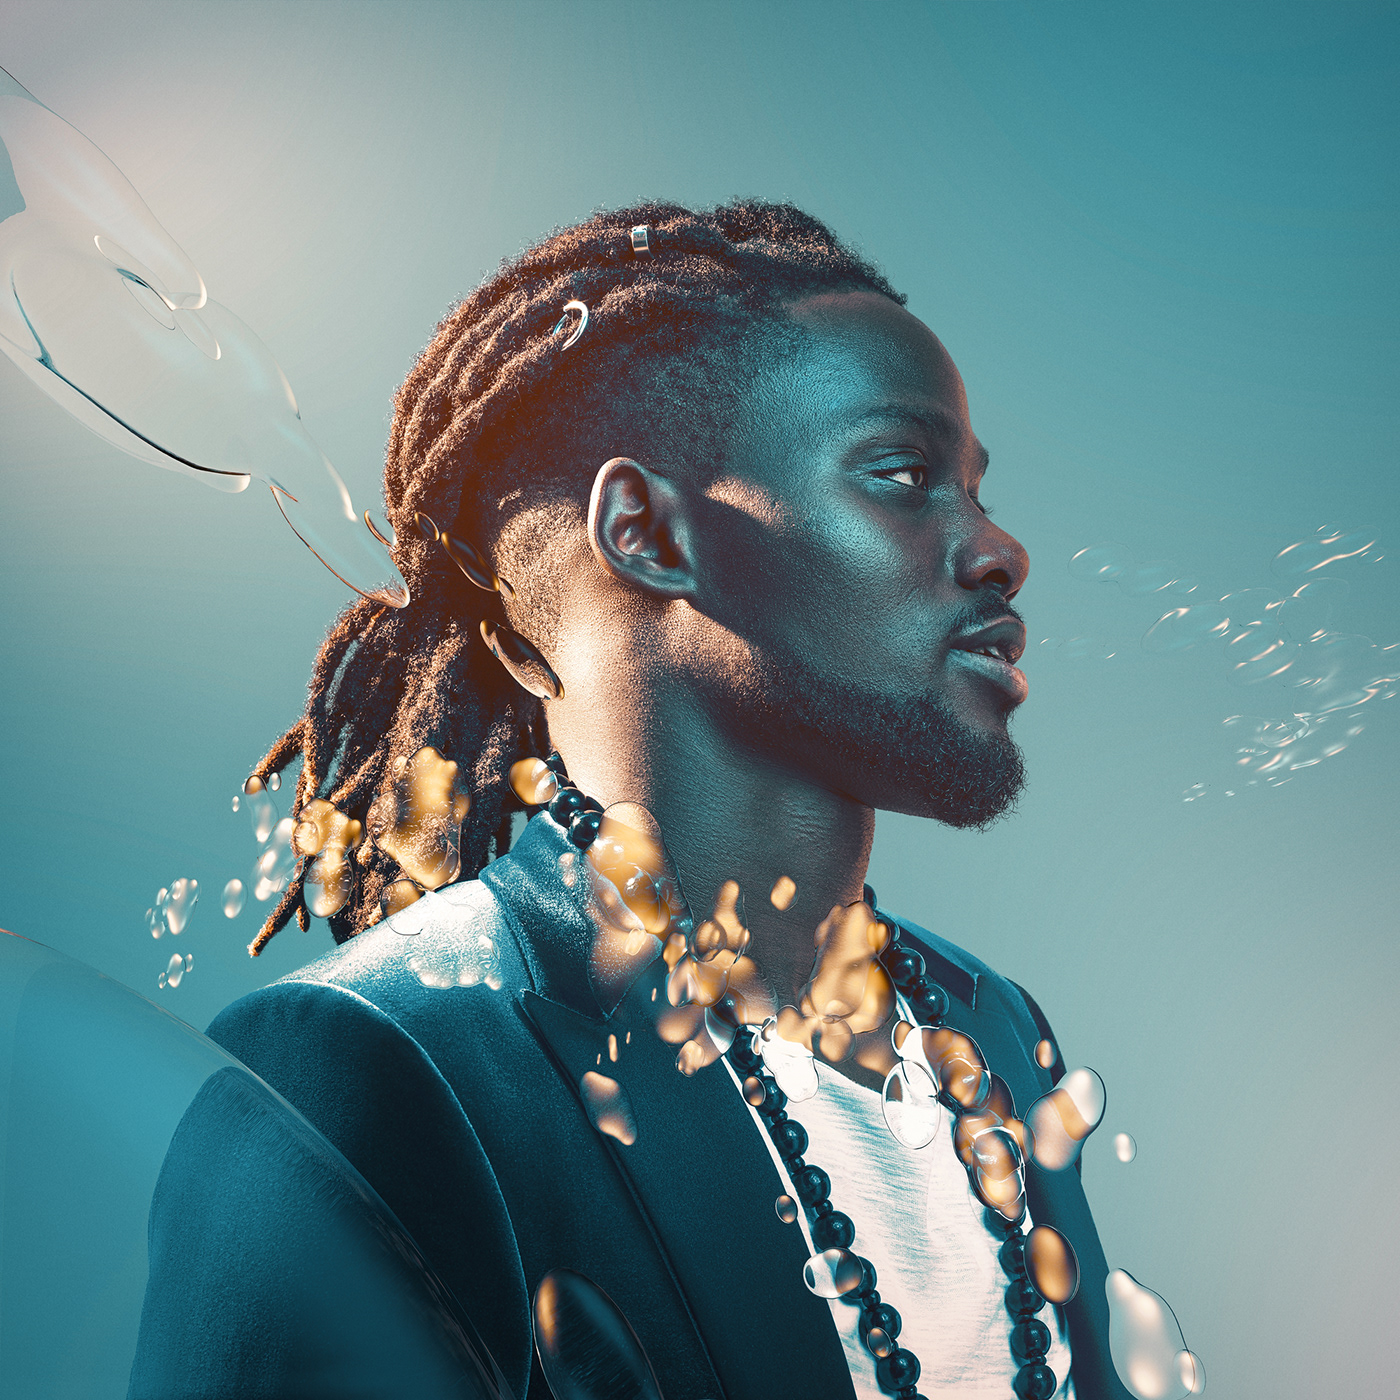 art direction  bubbles CGI colorful Moody Music artist Photography  portrait underwater water